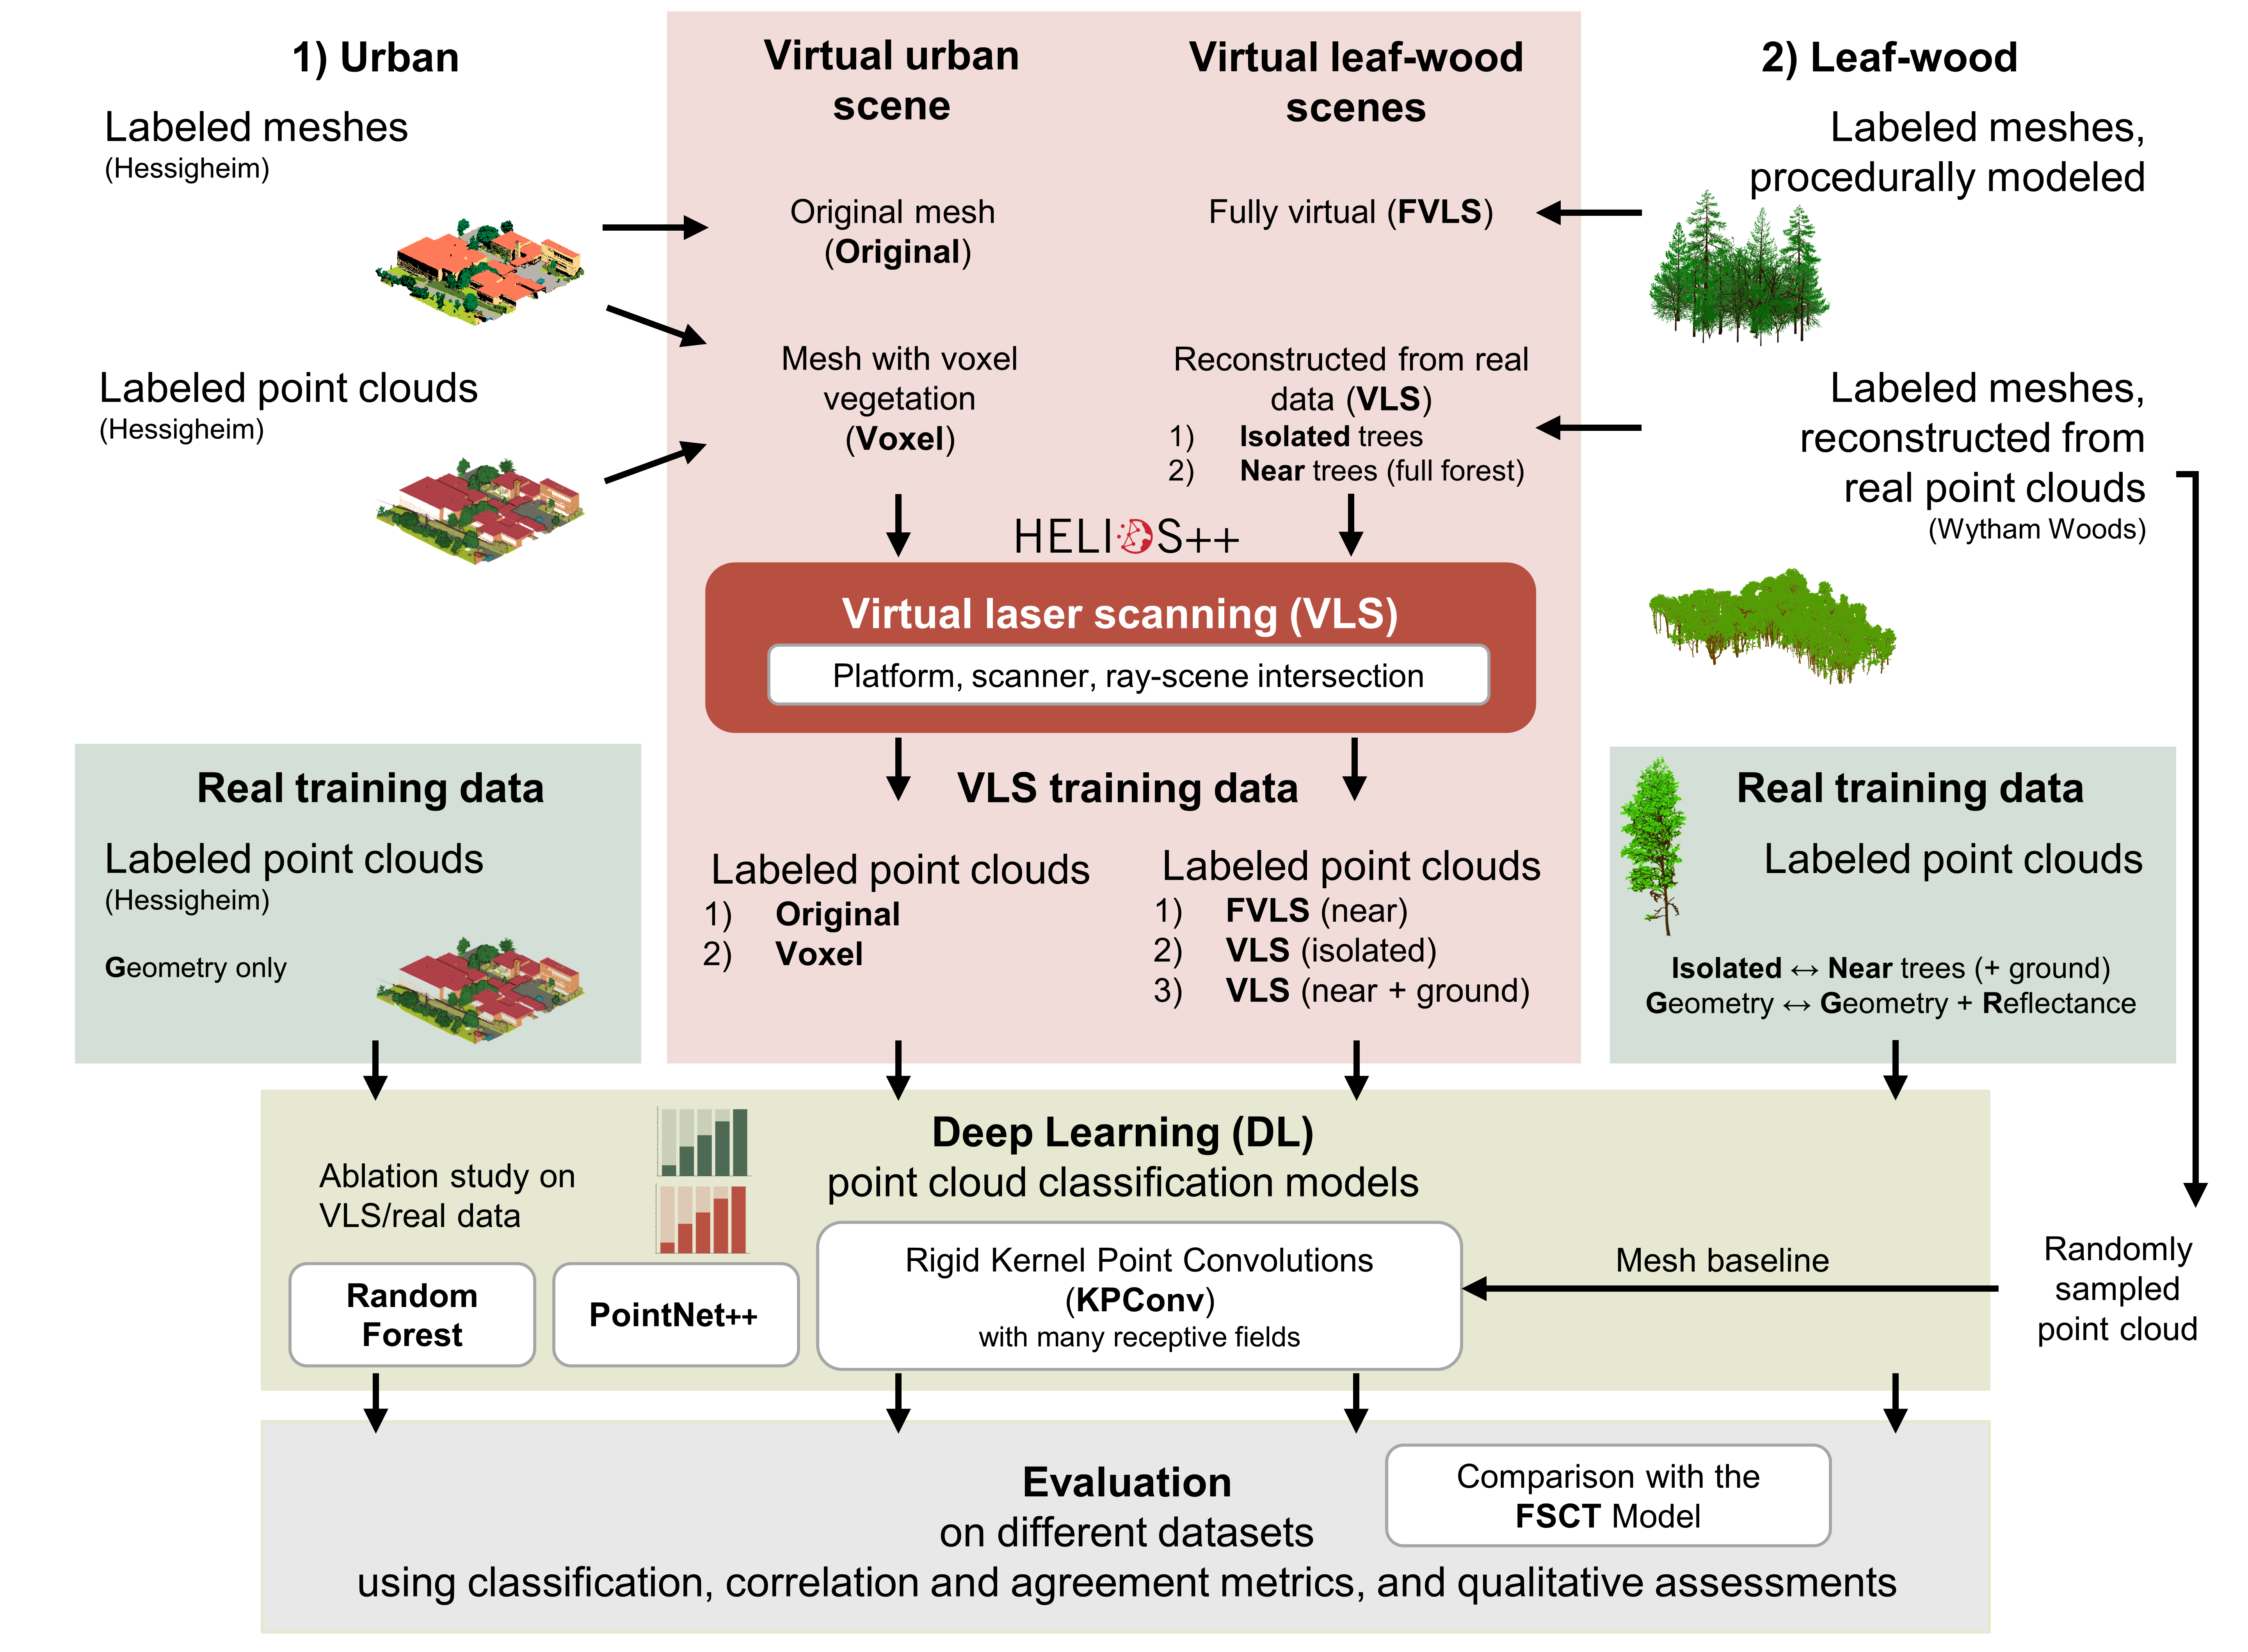 Deep learning with simulated laser scanning data for 3D point cloud classification